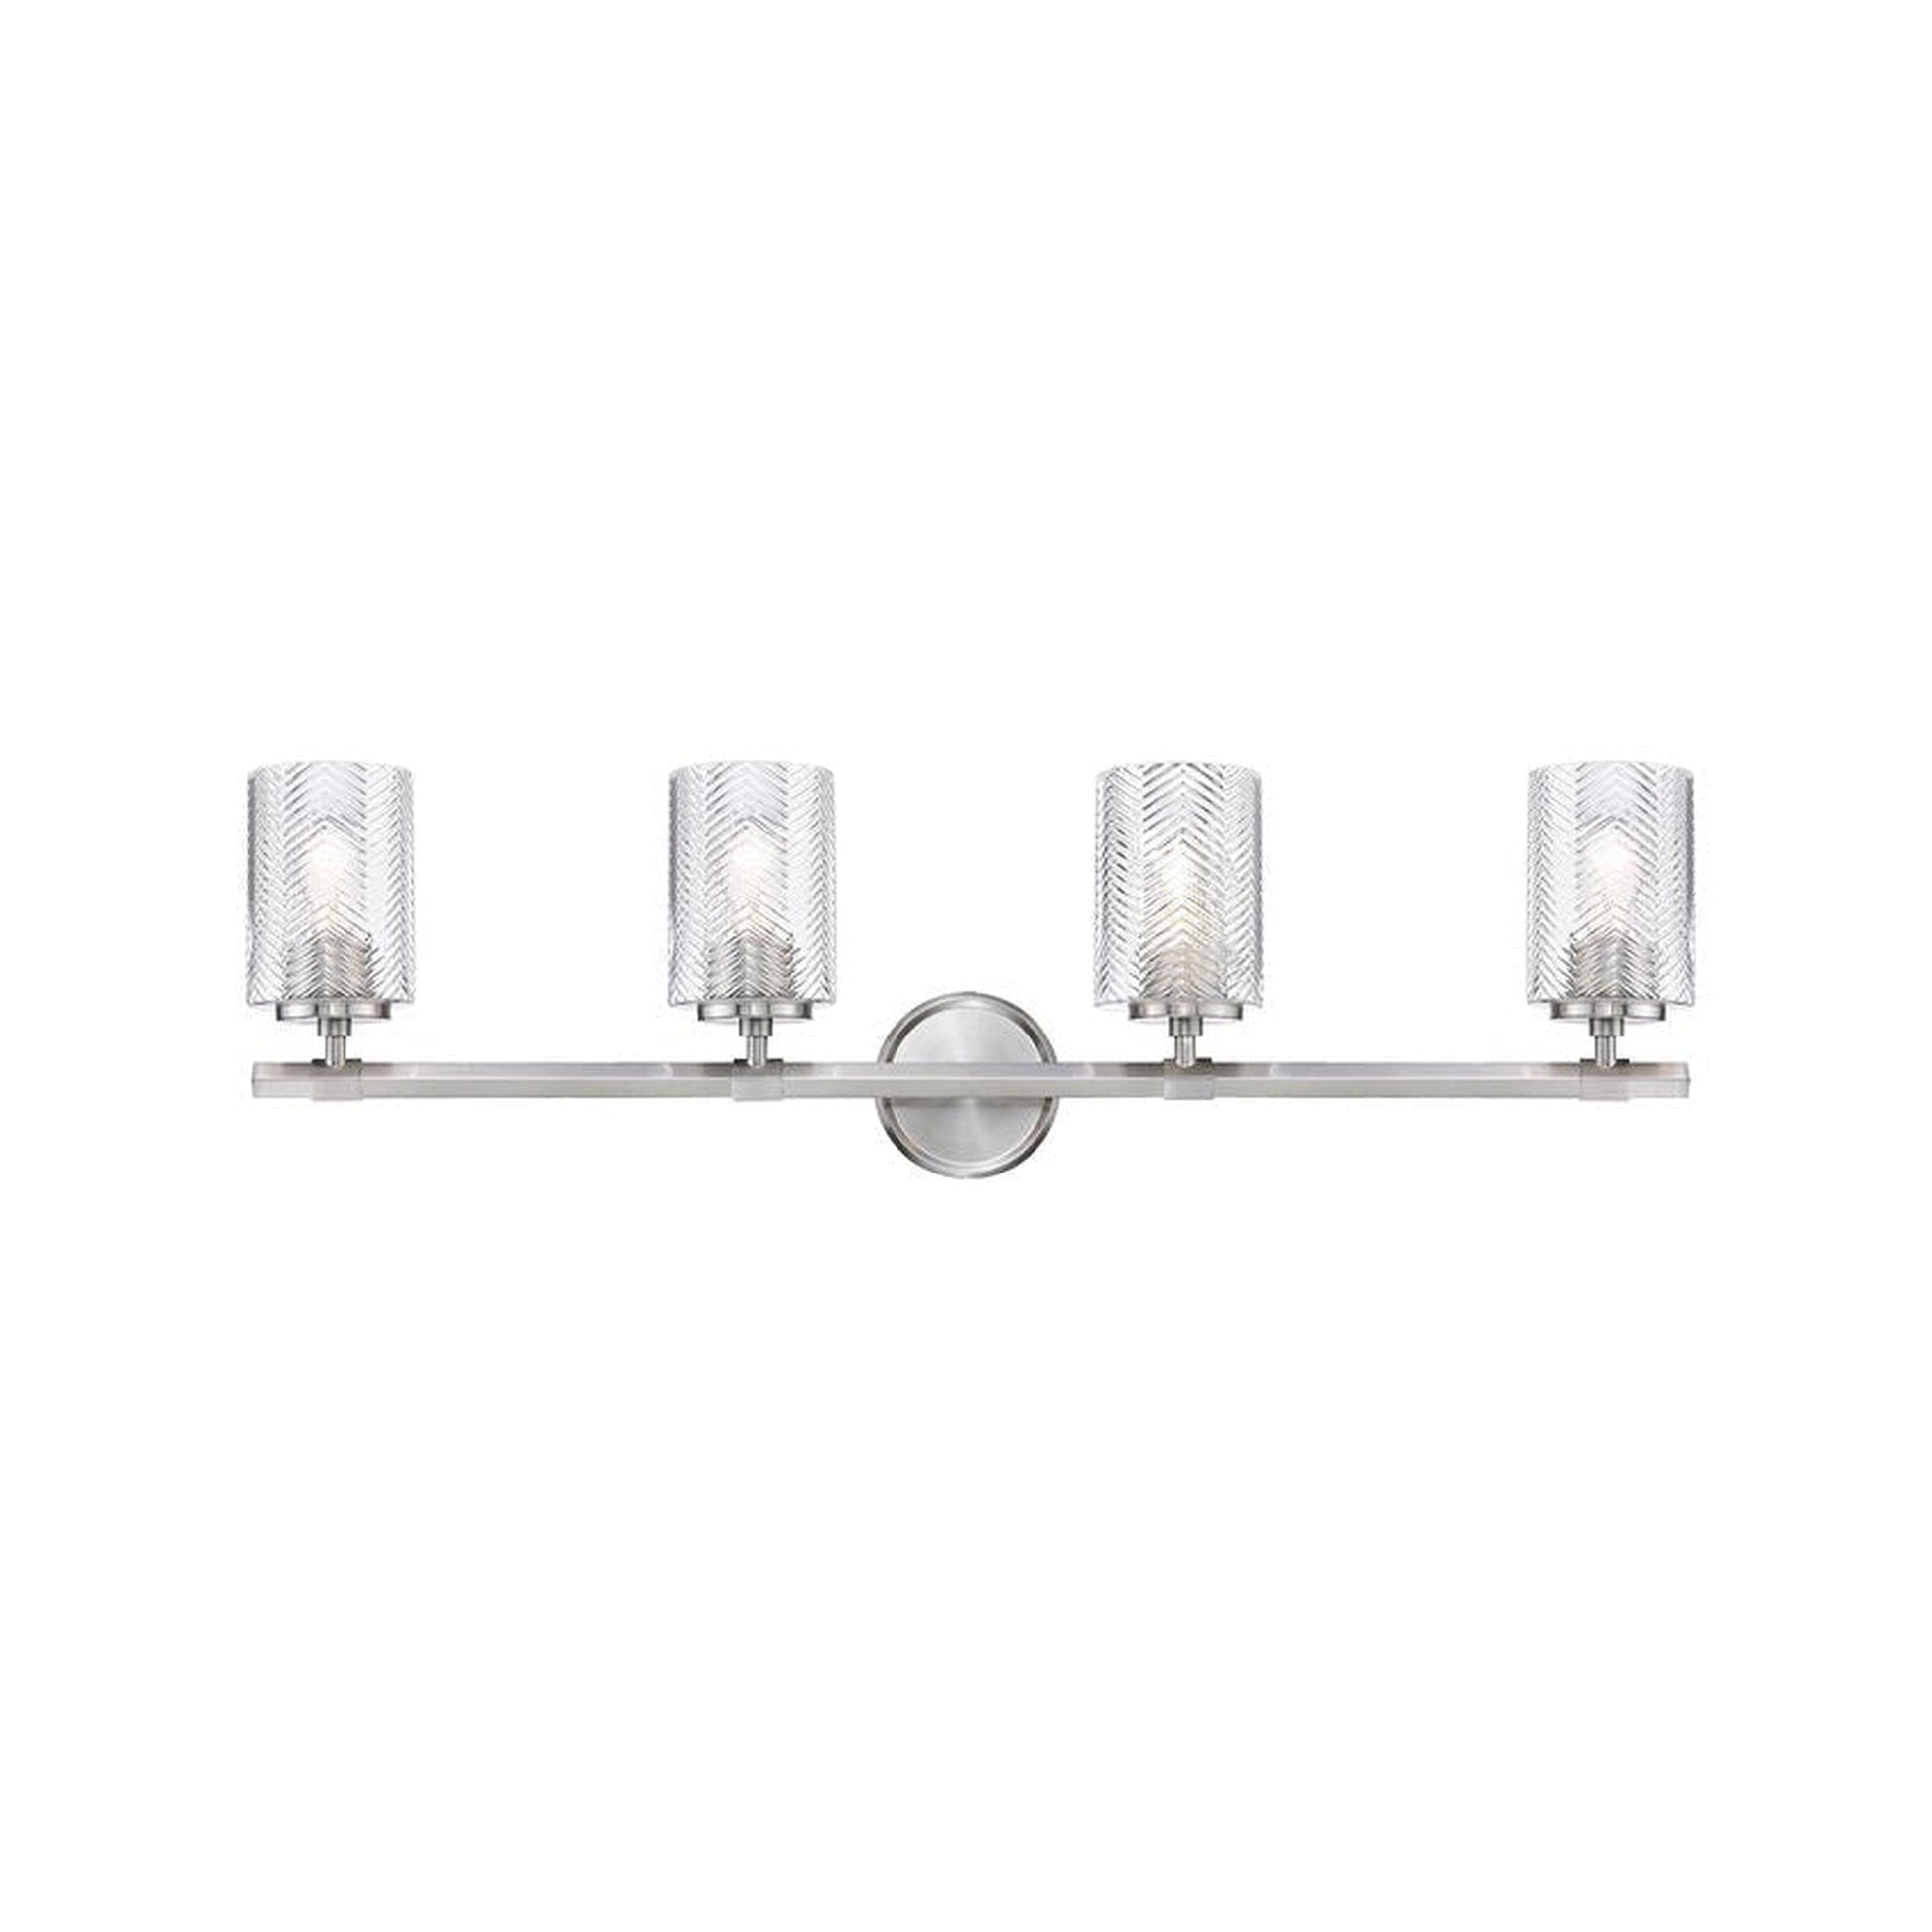 Z-Lite Dover Street 33" 4-Light Brushed Nickel Vanity Light With Clear Glass Shade